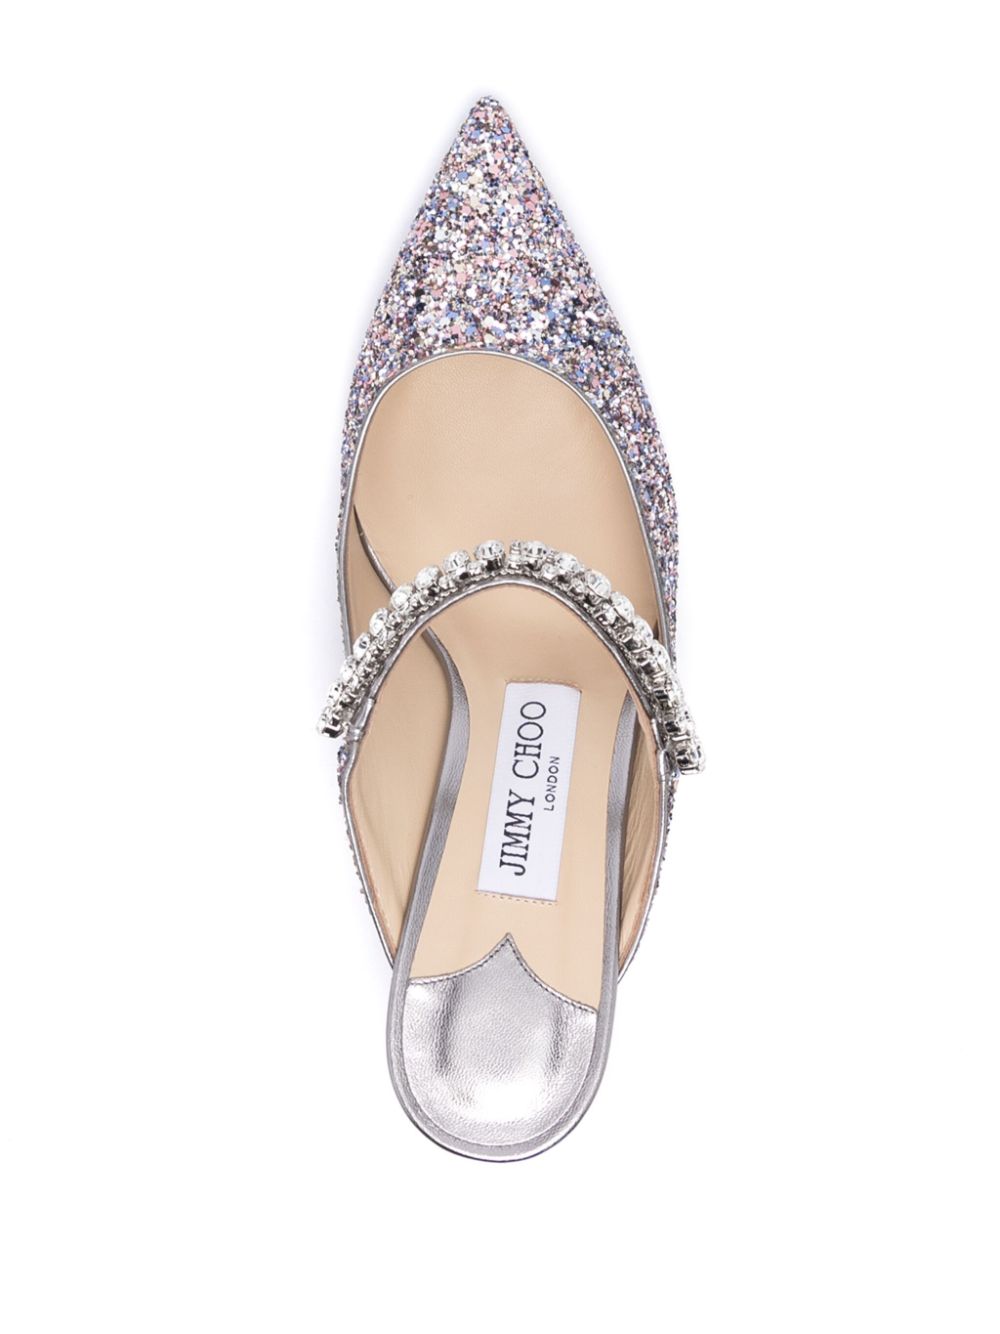 JIMMY CHOO Sparkling Silver Pointed Toe Pumps - Mid Heel Stiletto Shoes for Women